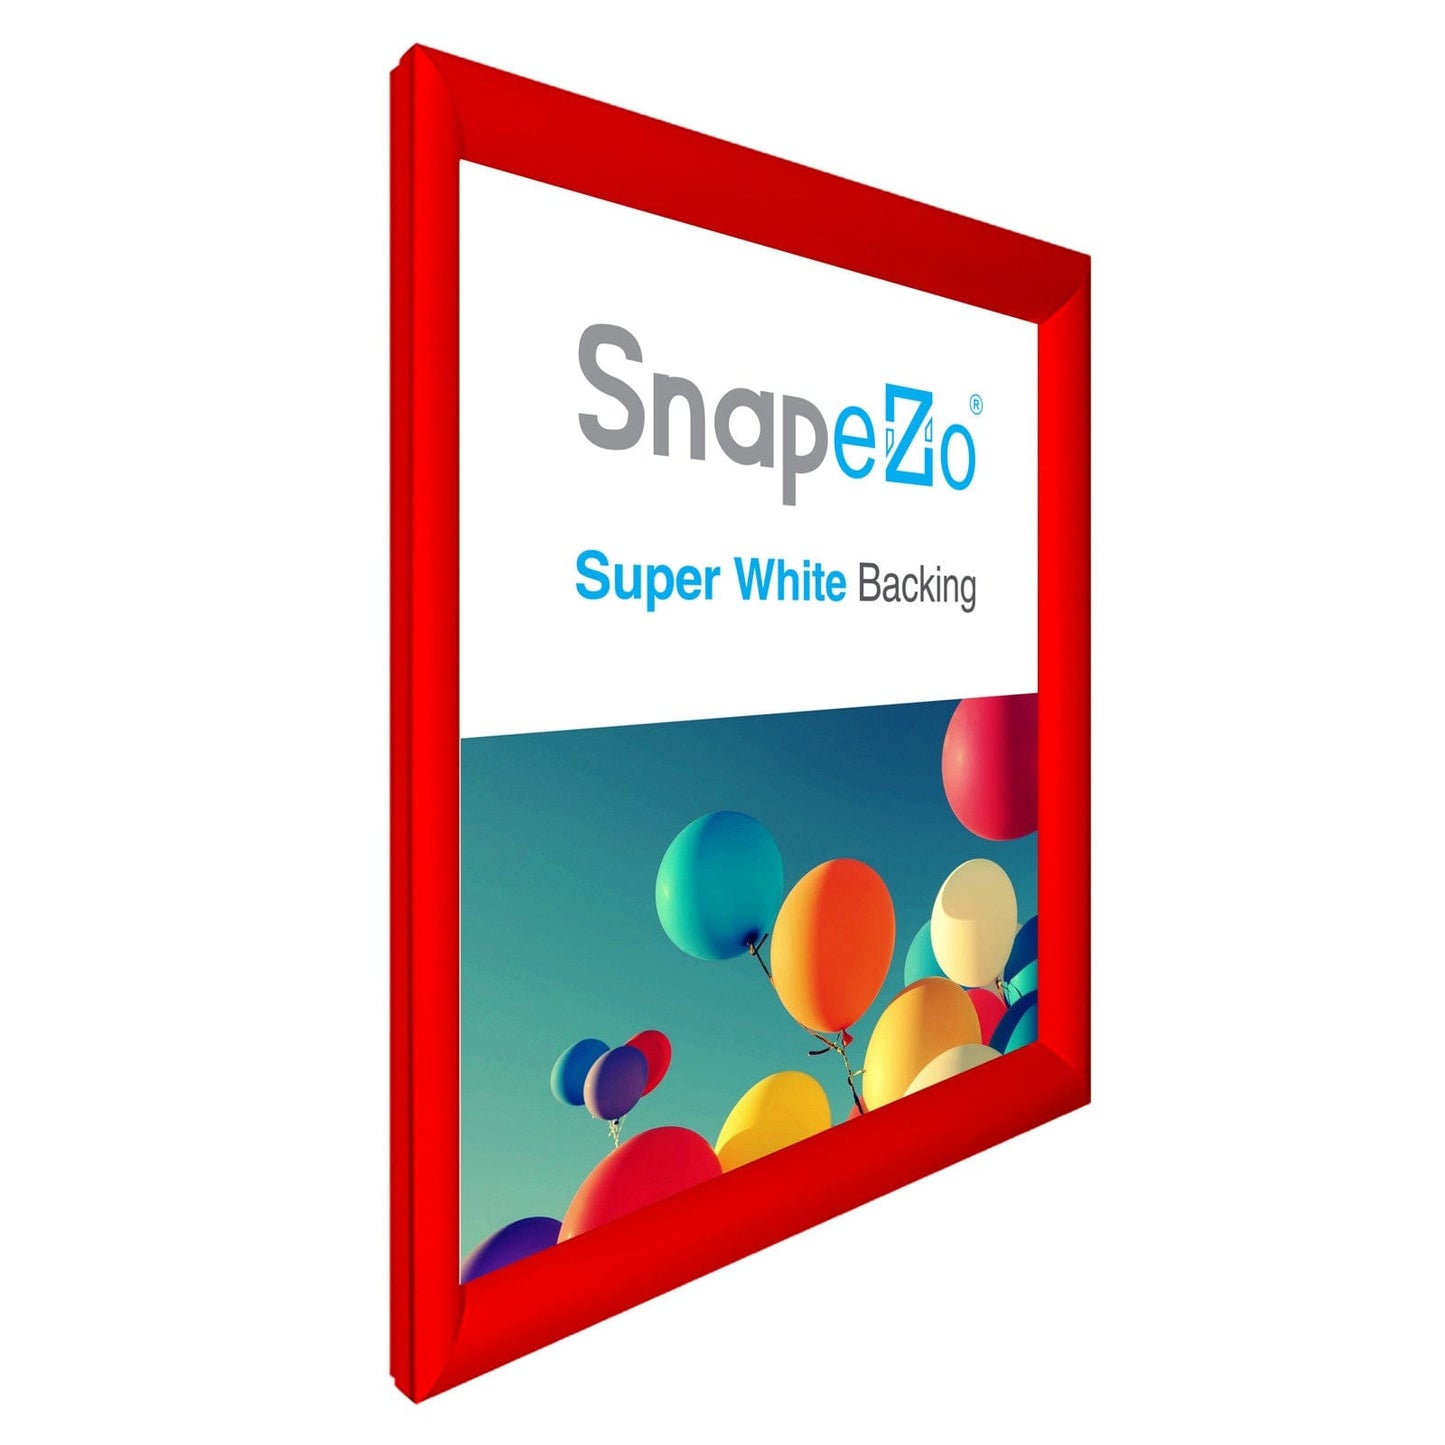 26x32 Red SnapeZo® Snap Frame - 1.2" Profile - Snap Frames Direct